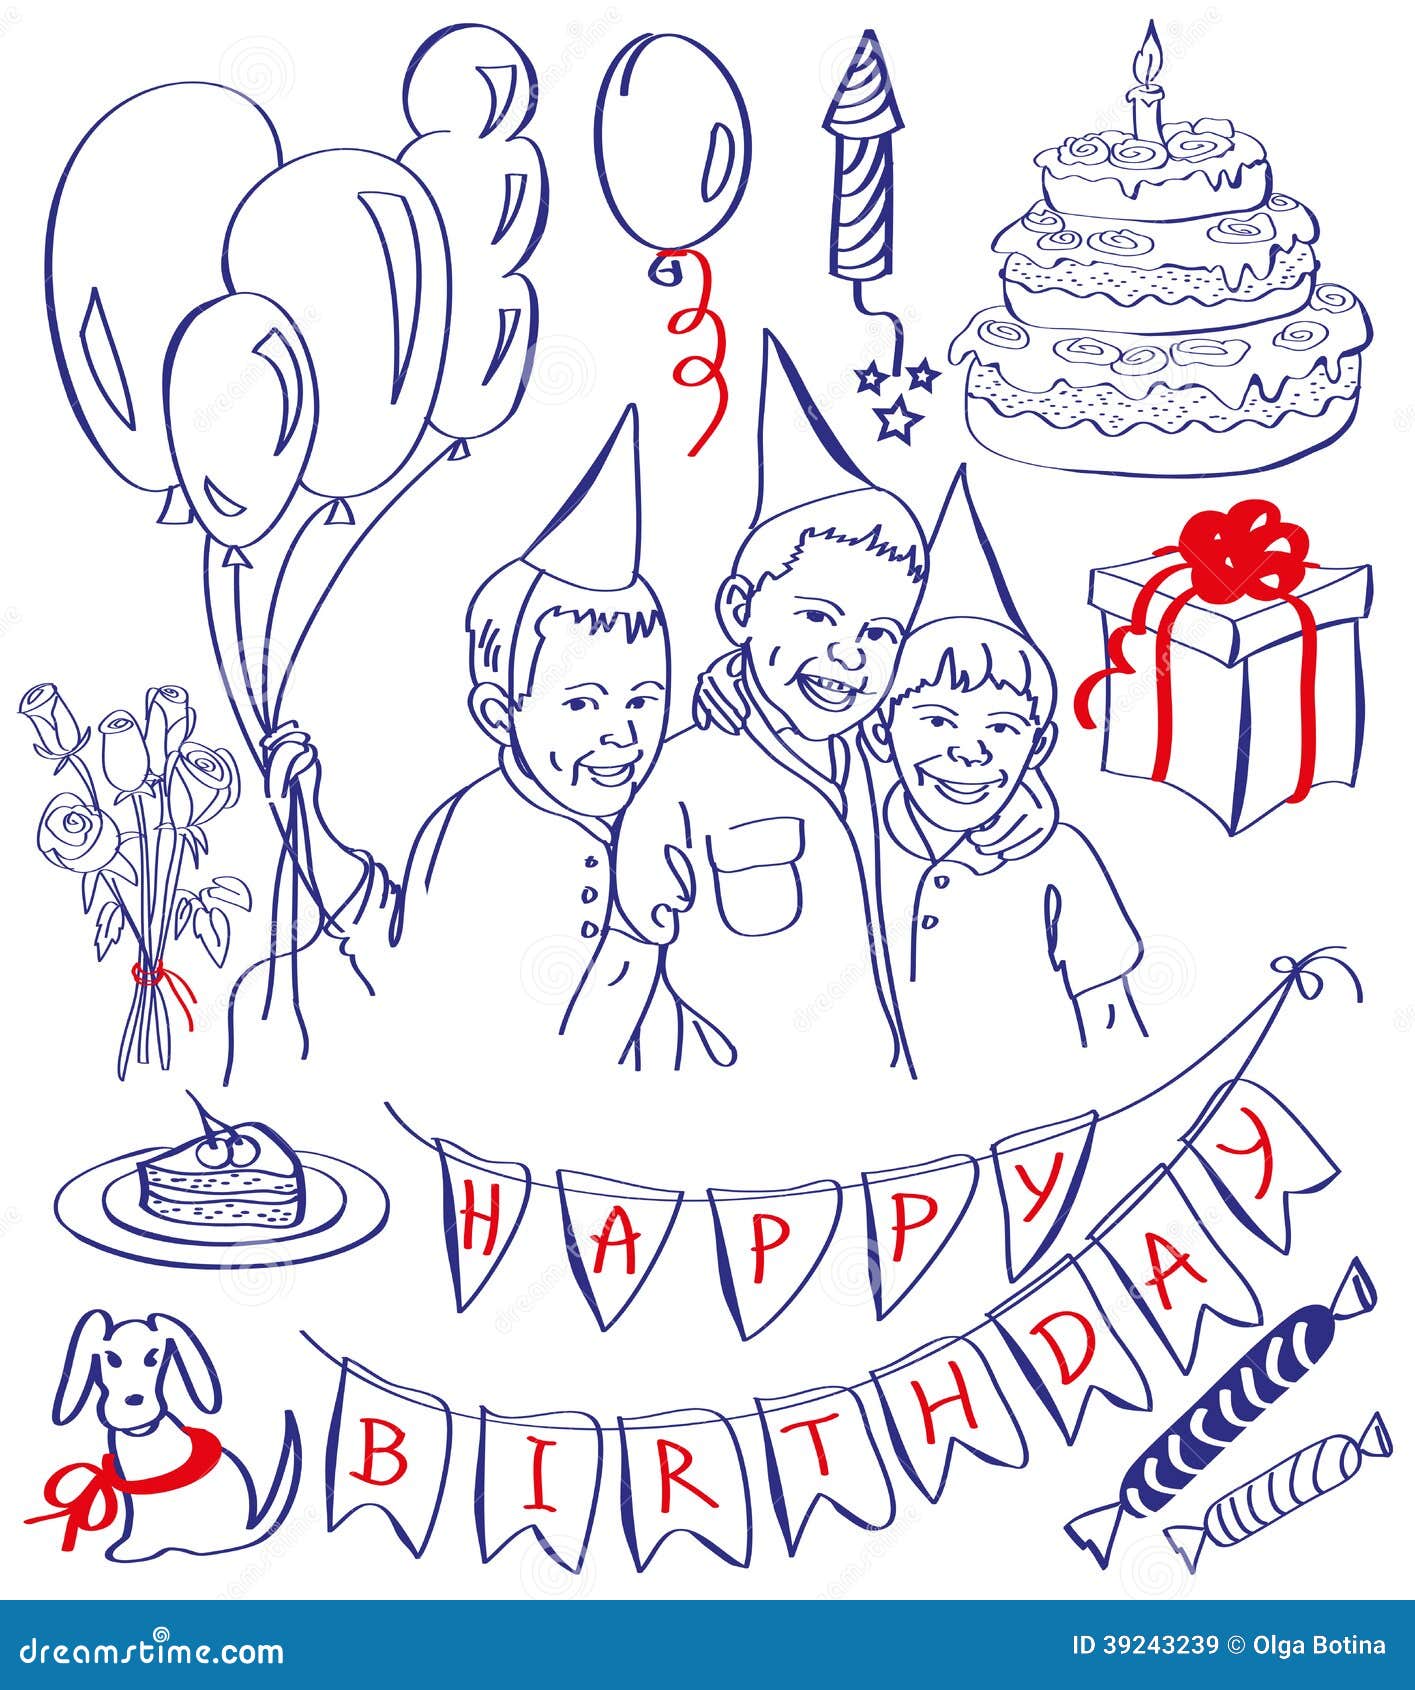 Happy birthday. Drawing on the tablet. Image of various attributes birthday. Boys with balls laugh.